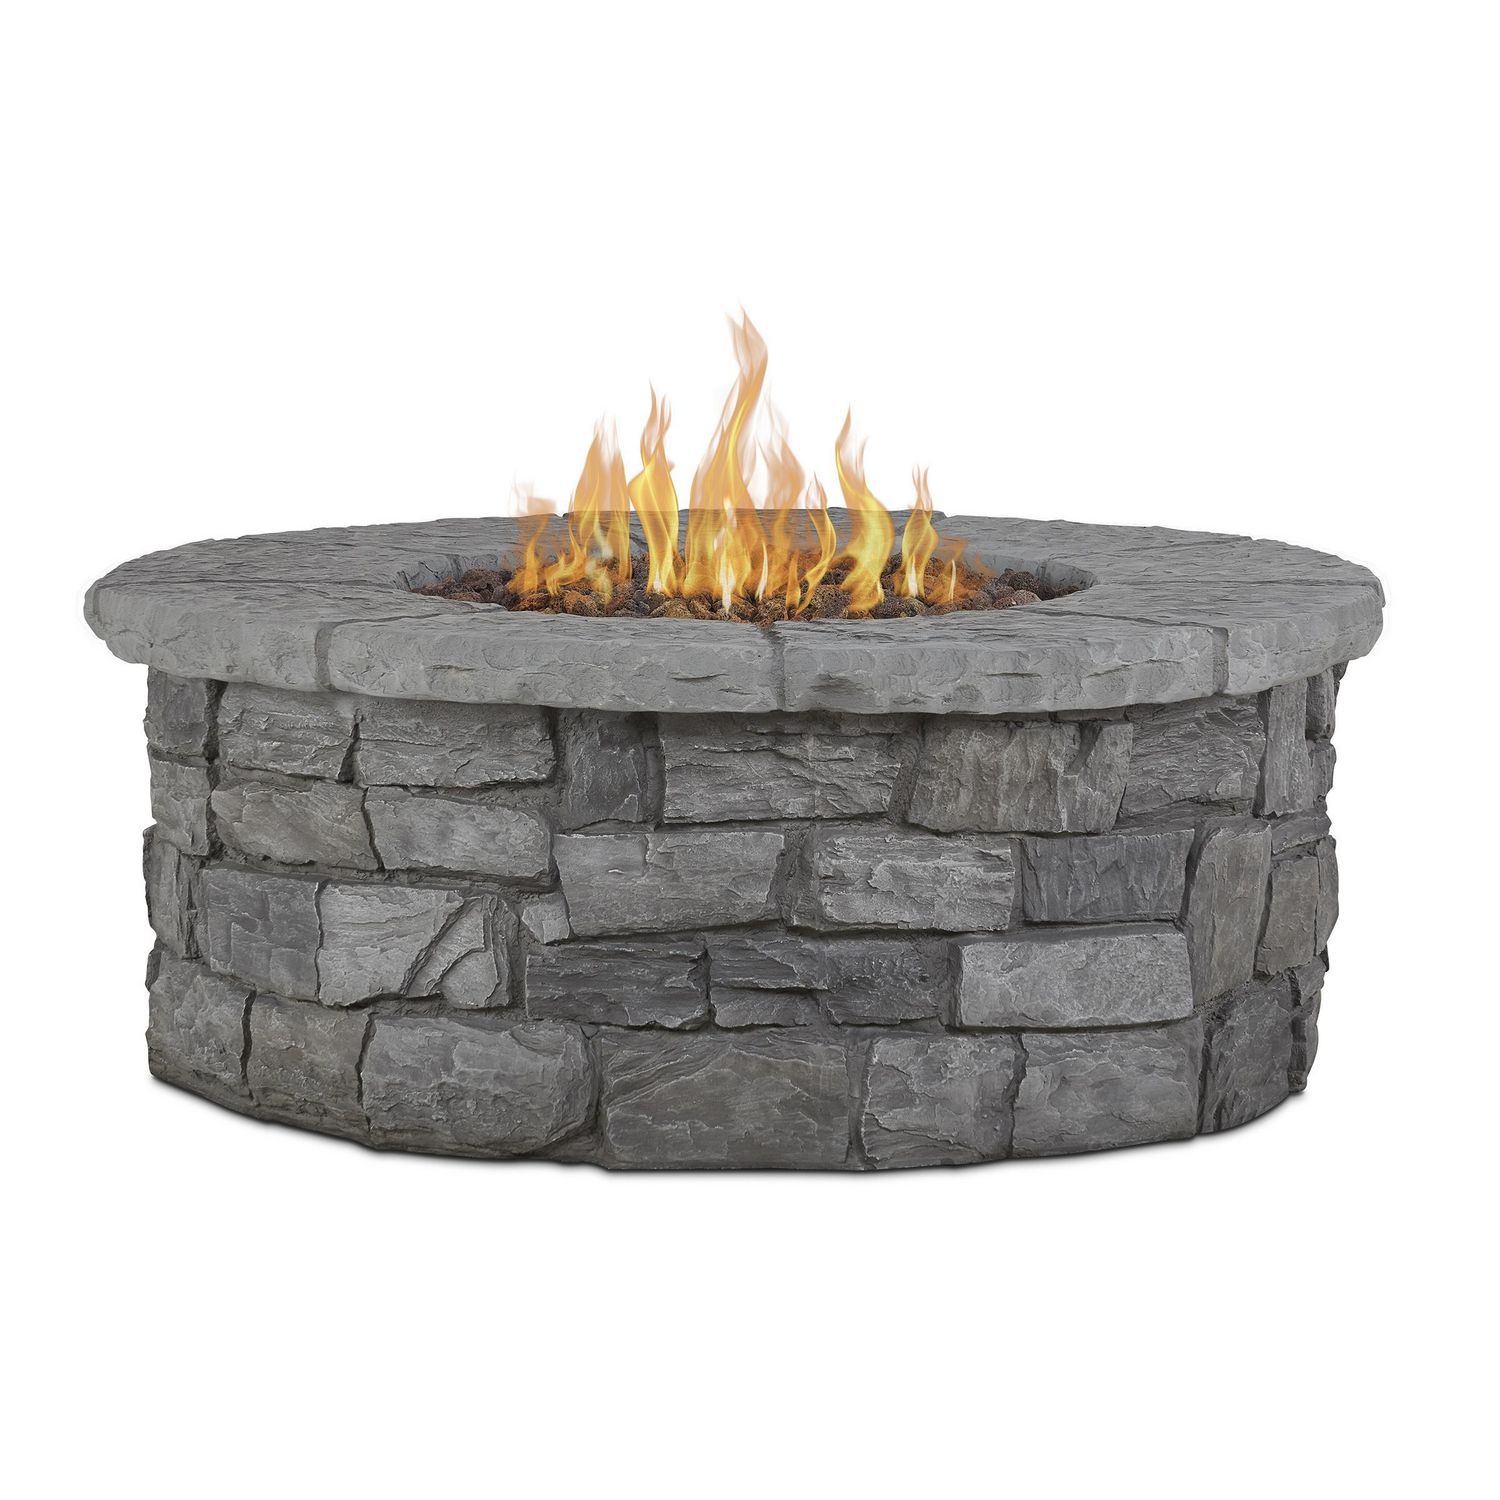 Sedona Round Propane Fire Table In Gray, How To Convert Propane Natural Gas Fire Pit